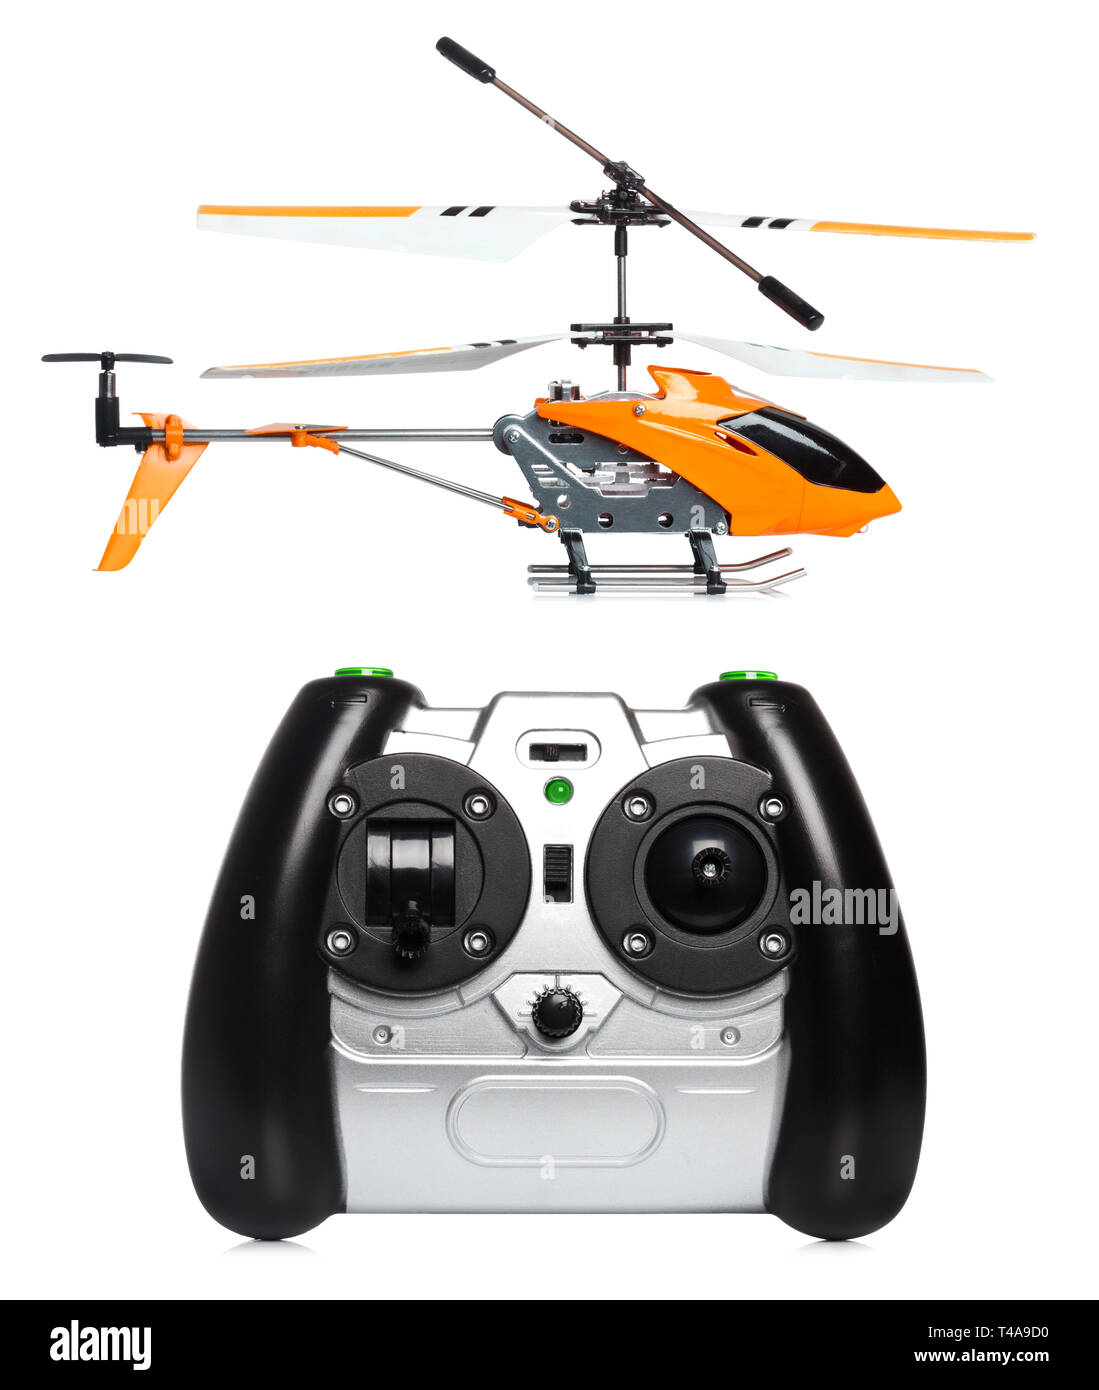 Remote Wala Helicopter Cheap Purchase, Save 54% | jlcatj.gob.mx